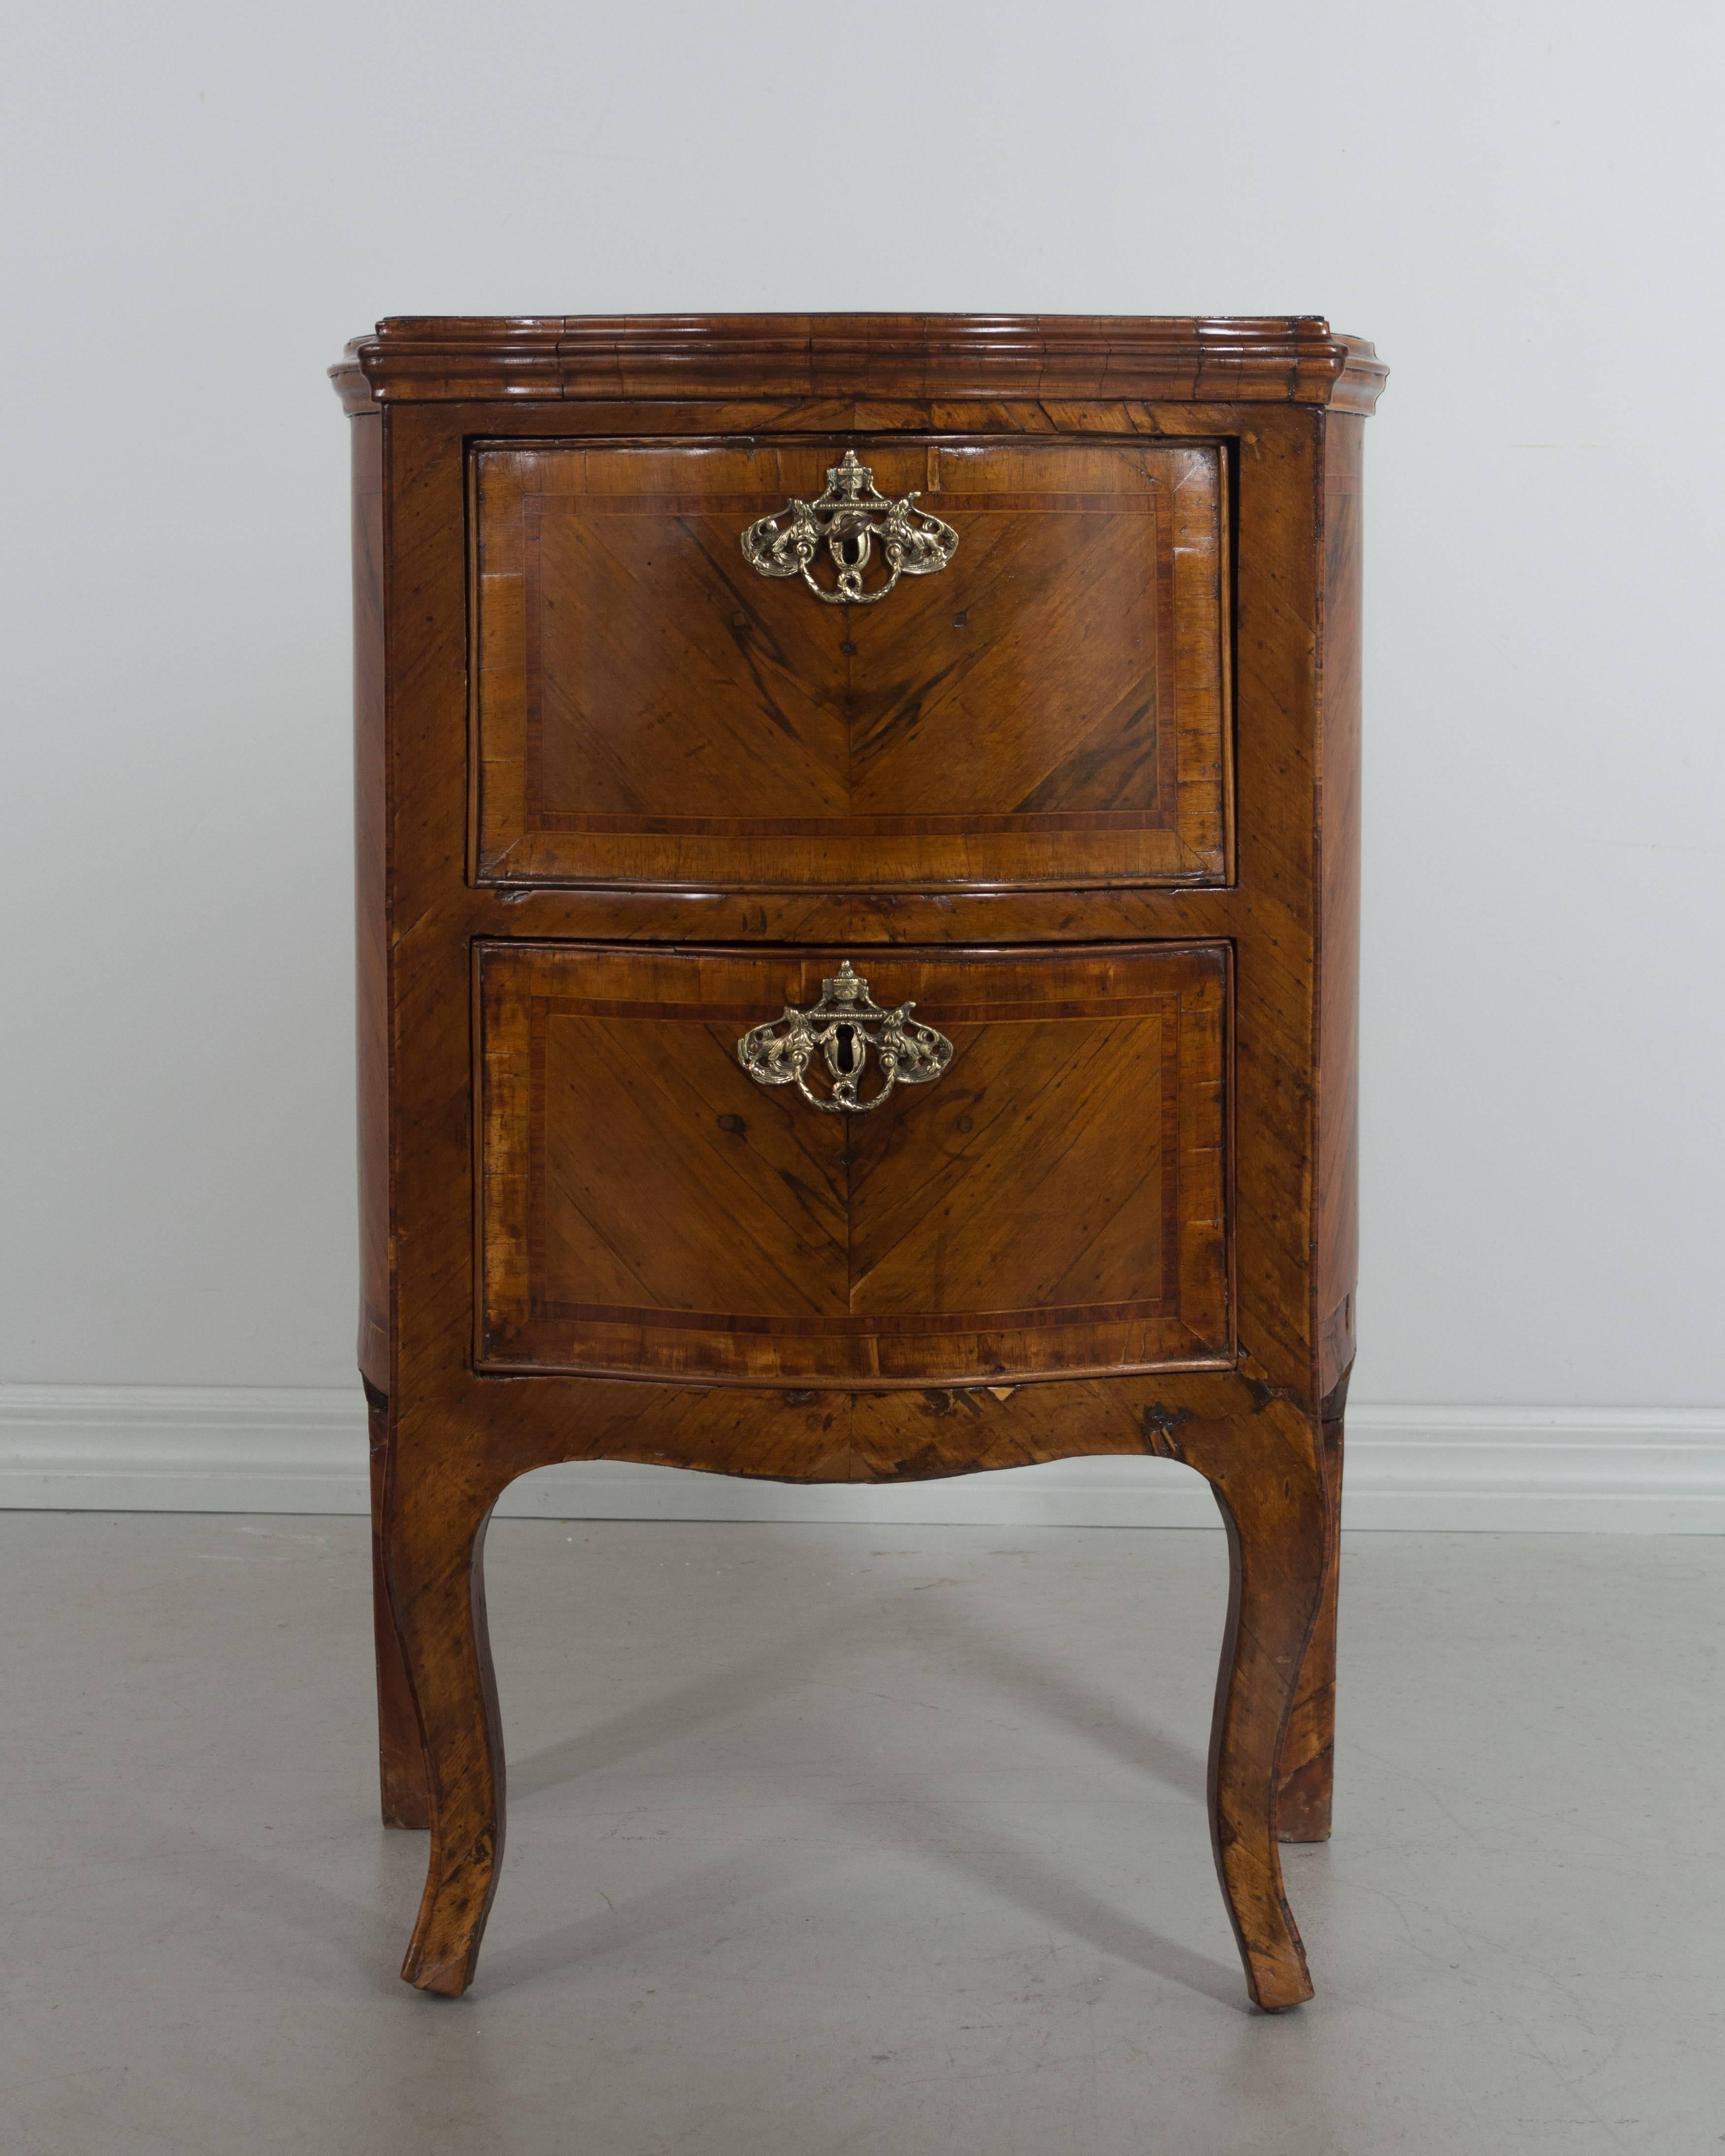 A small 18th Century Italian commode with serpentine front and curved sides, made of veneers of walnut. French polish finish. A nice size for use as a nightstand. New bronze hardware. Restoration on back legs.
More photos available upon request. We